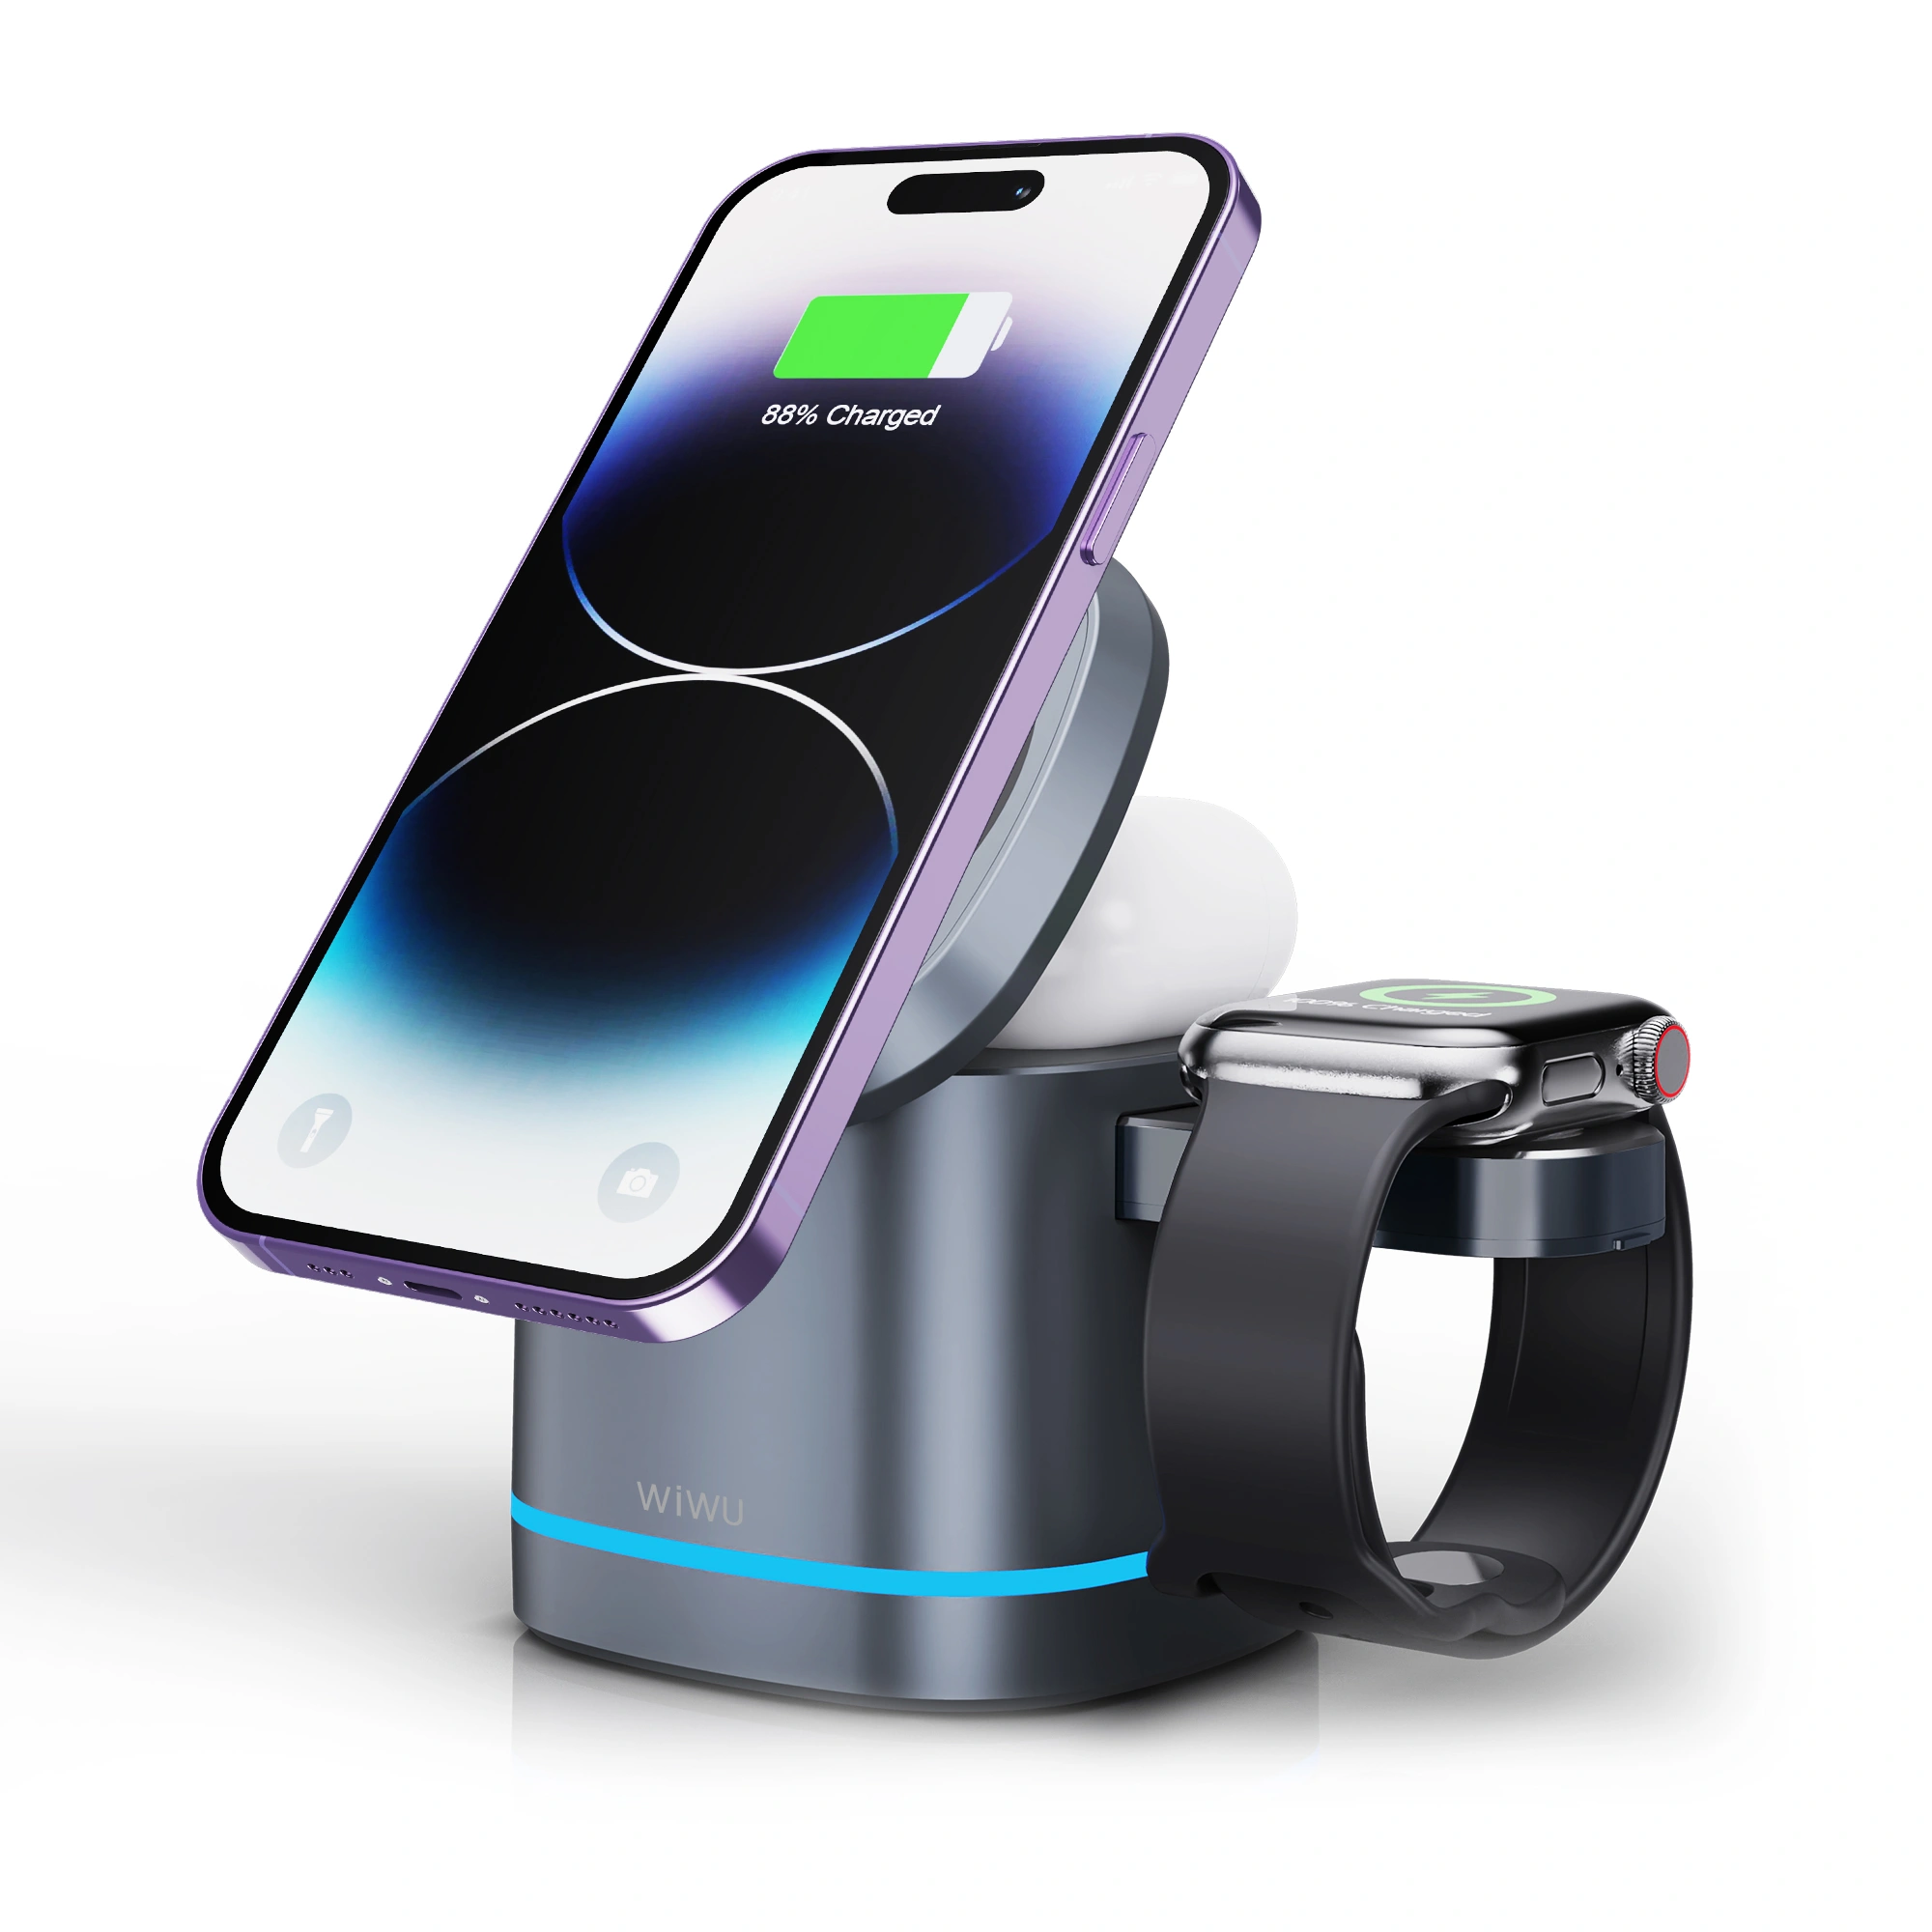 Auto Orient Wiwu 3 In 1 Wireless Charger For Phone/ Iwatch/ Airpods Material: Abs+ Tempered Glass 15W Wireless Charge For Phone 5W For Airpods 3W For Smart Watch Type C Charging Port Wiwu Wi-W024 Rubik'S Cube 3 In 1 Wireless Charger Wiwu Wi-W024 Rubik'S Cube 3 In 1 Wireless Charger - Grey